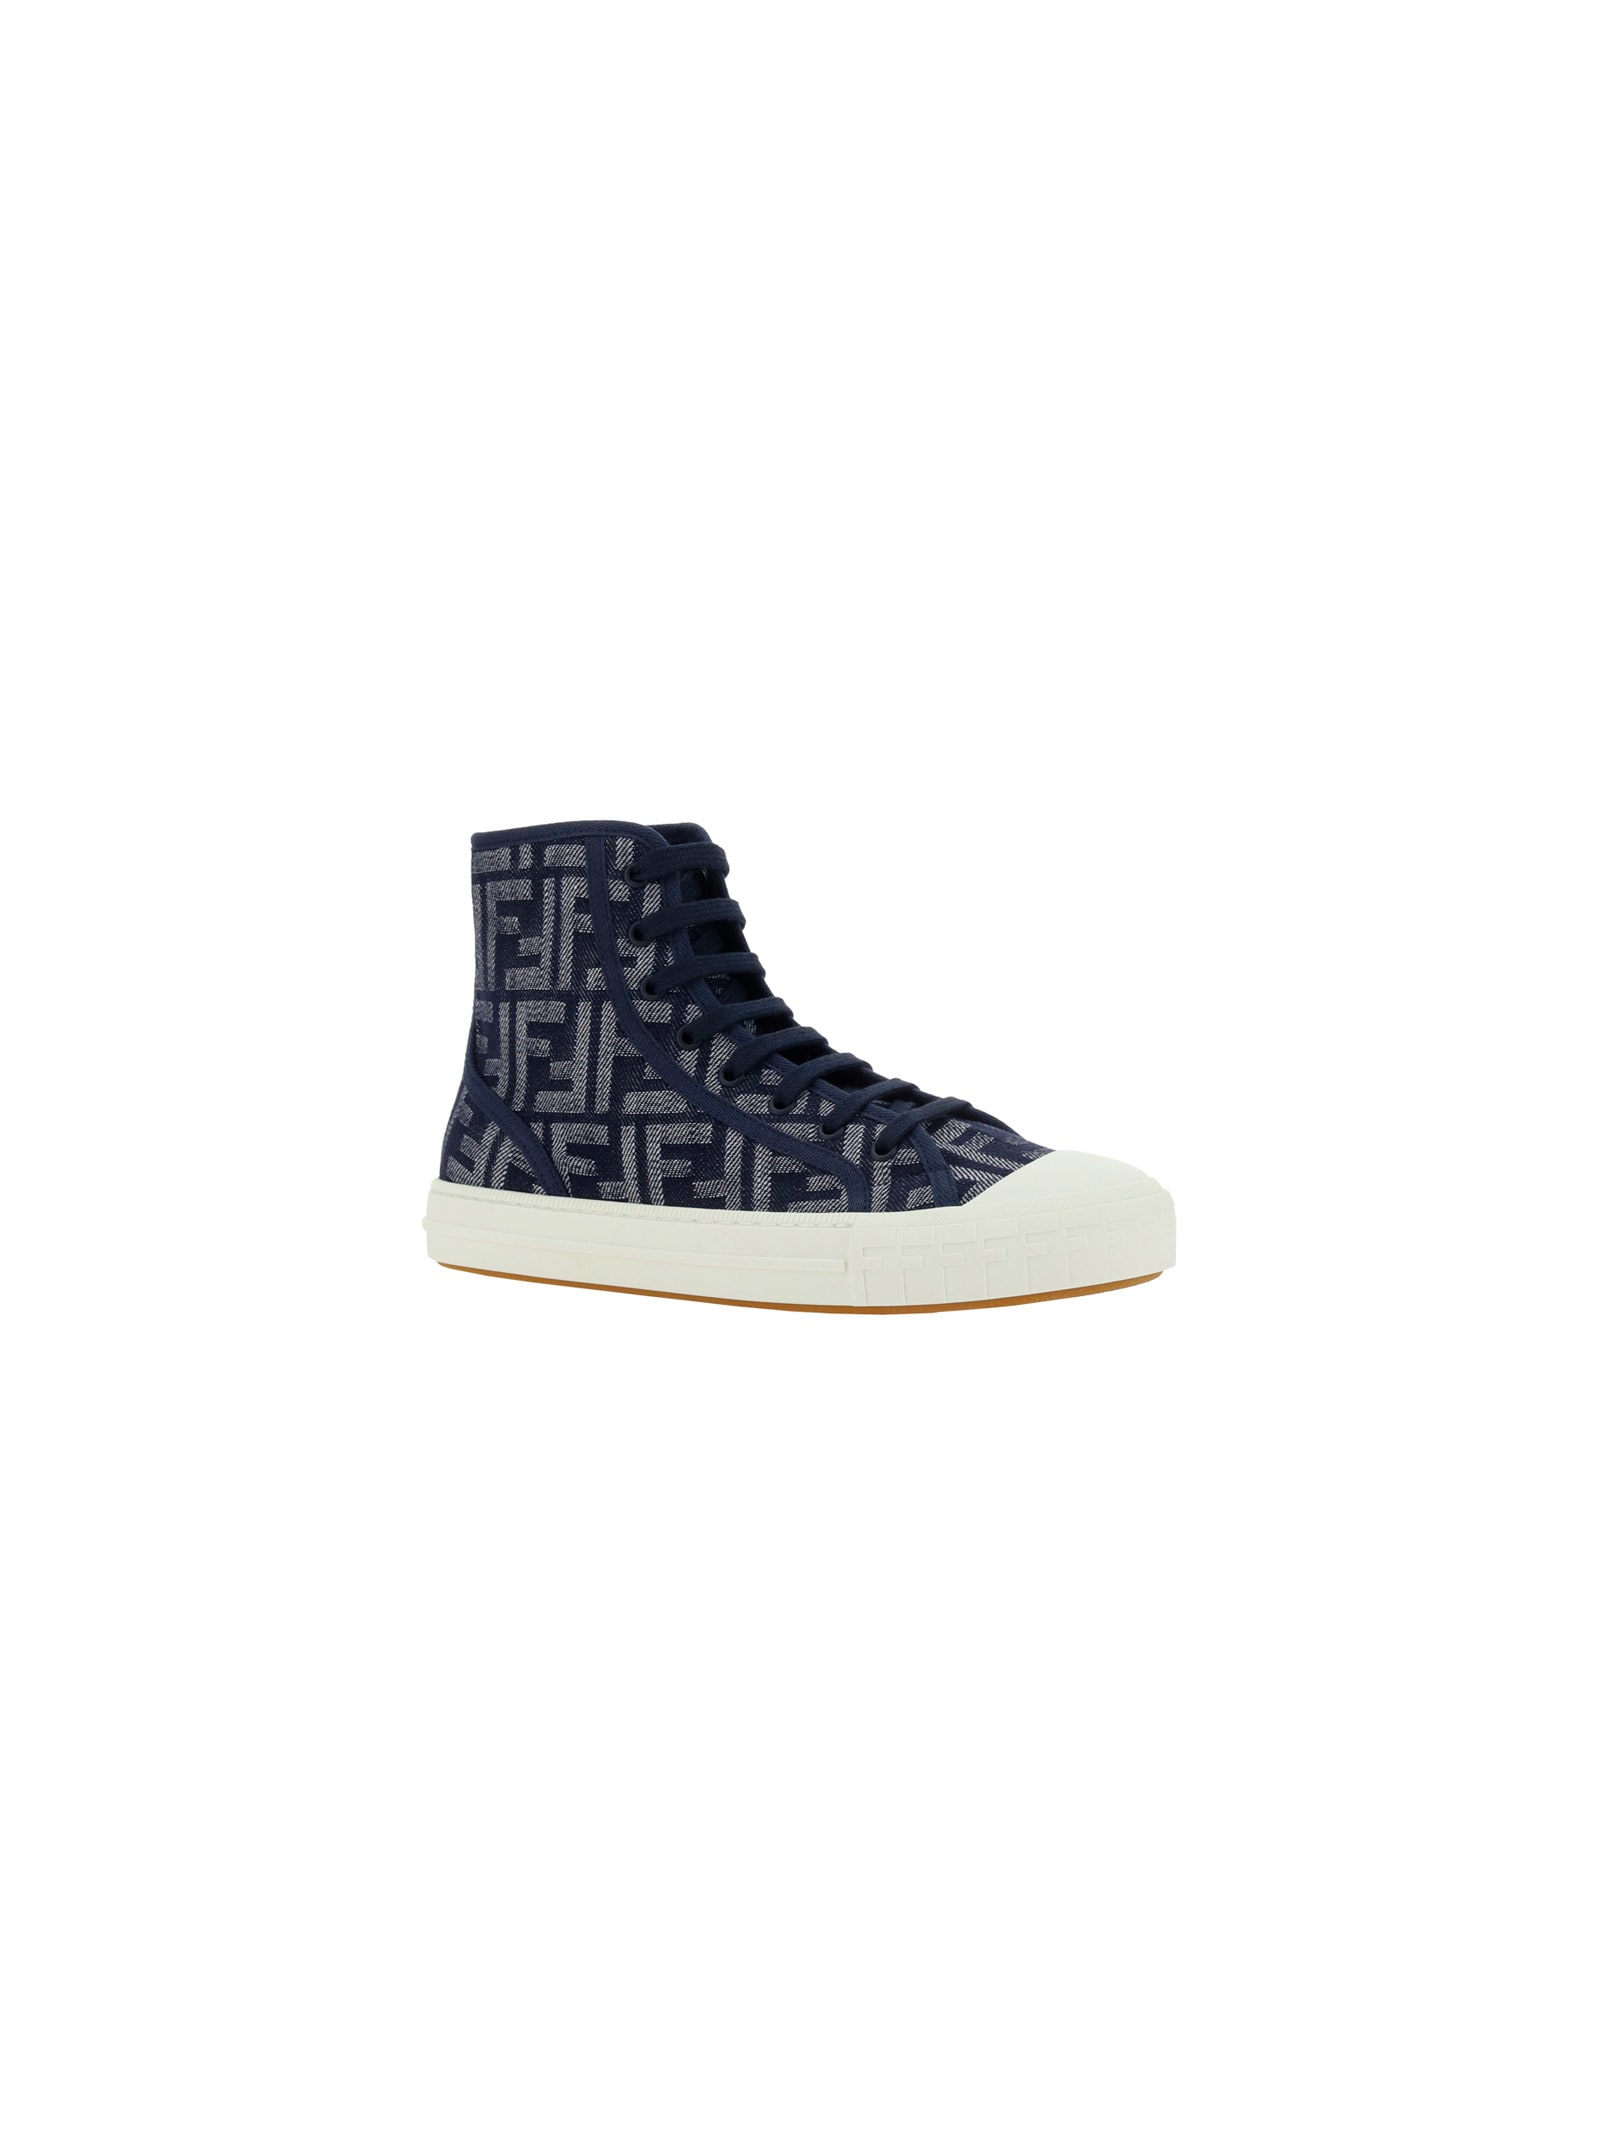 navy blue and white suede FF monogram-print low-top sneakers FENDI  7E1553-AM5H F0RBB - Nida